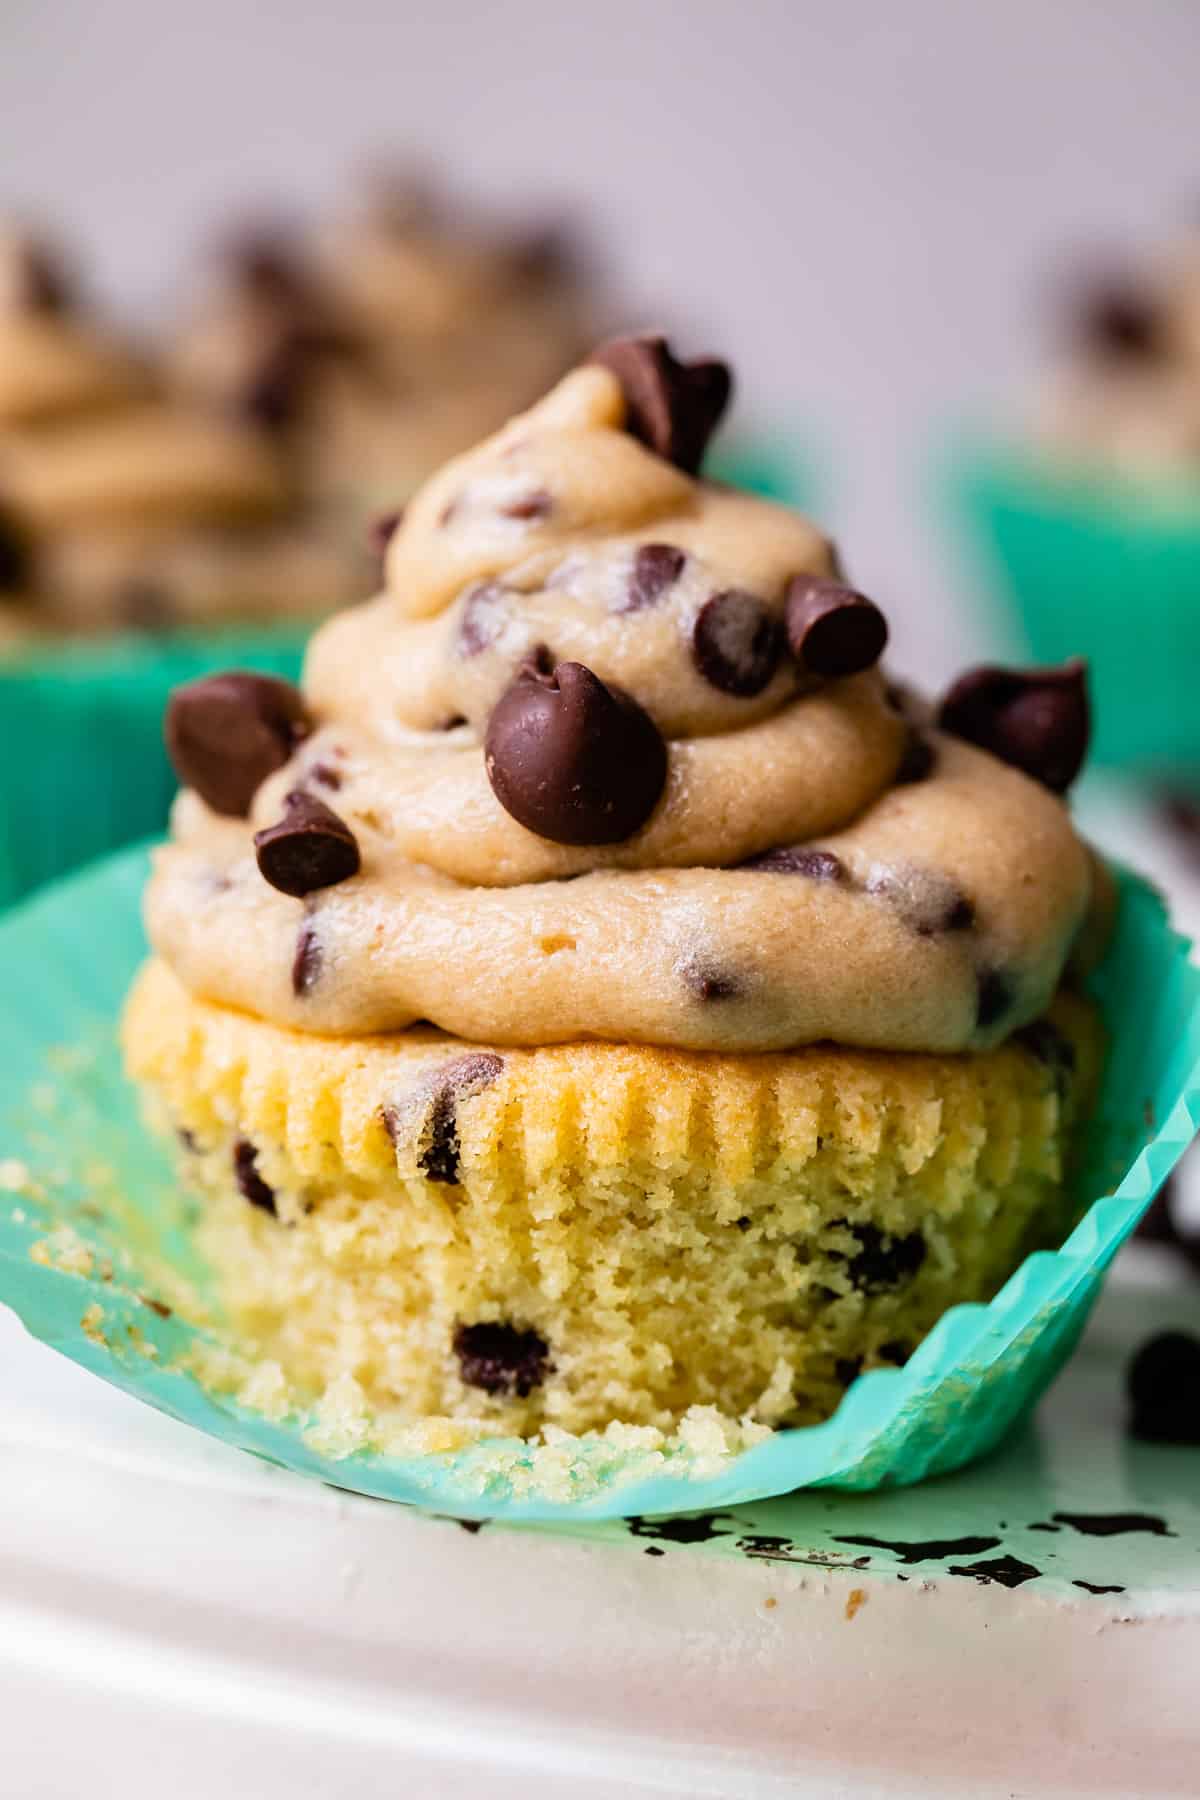 cupcake partially removed from its wrapper with chocolate chips and cookie dough frosting.